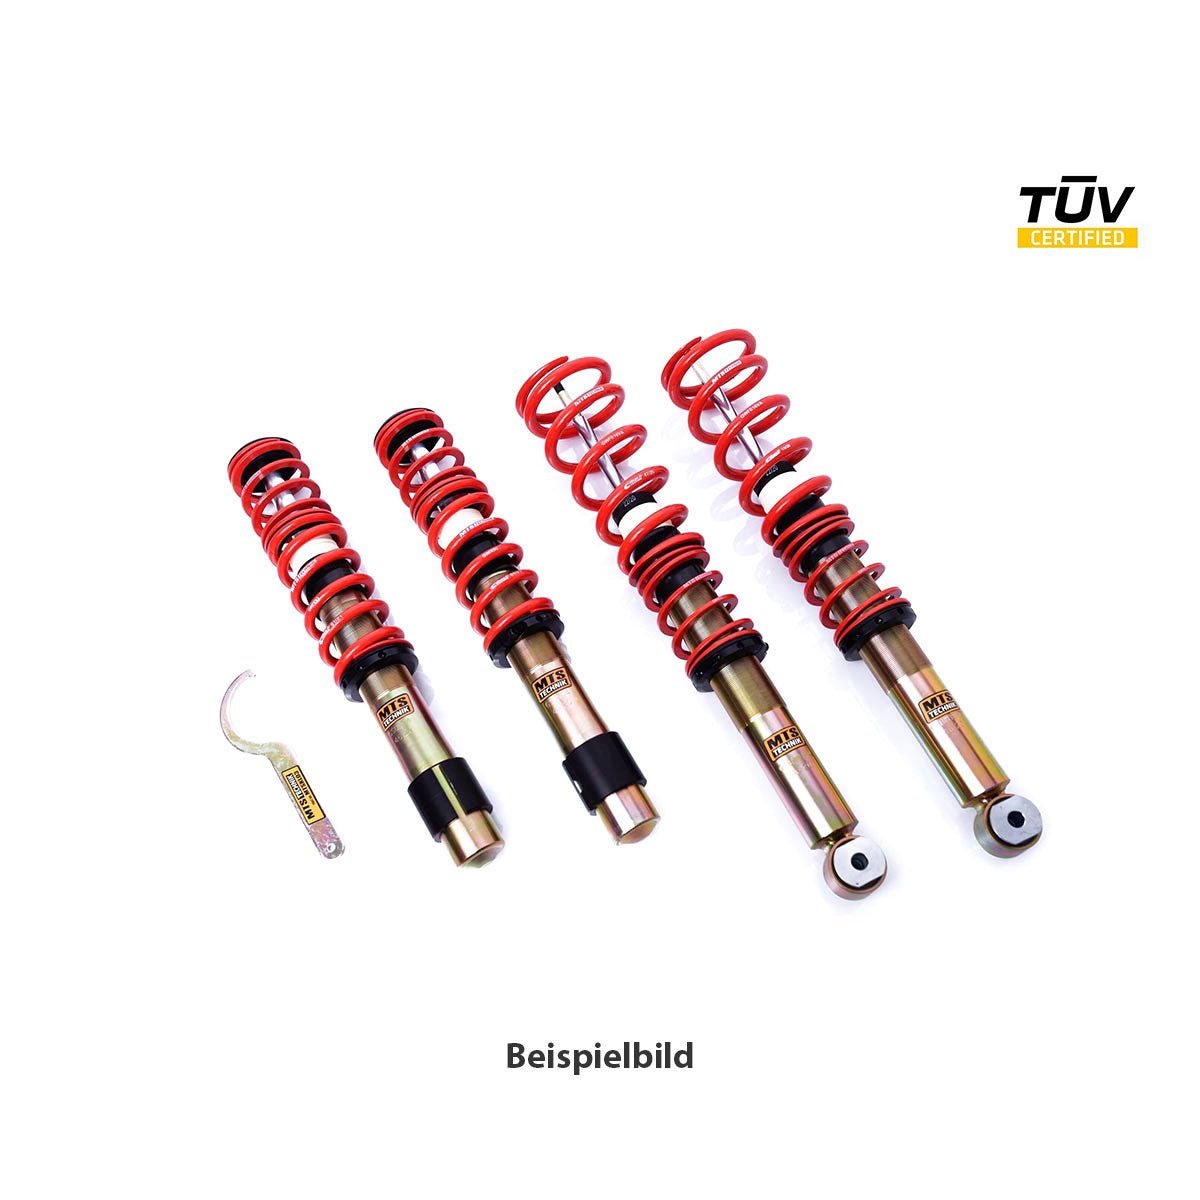 MTS TECHNIK Eibach coilover kit STREET Skoda Roomster (with TÜV) - PARTS33 GmbH